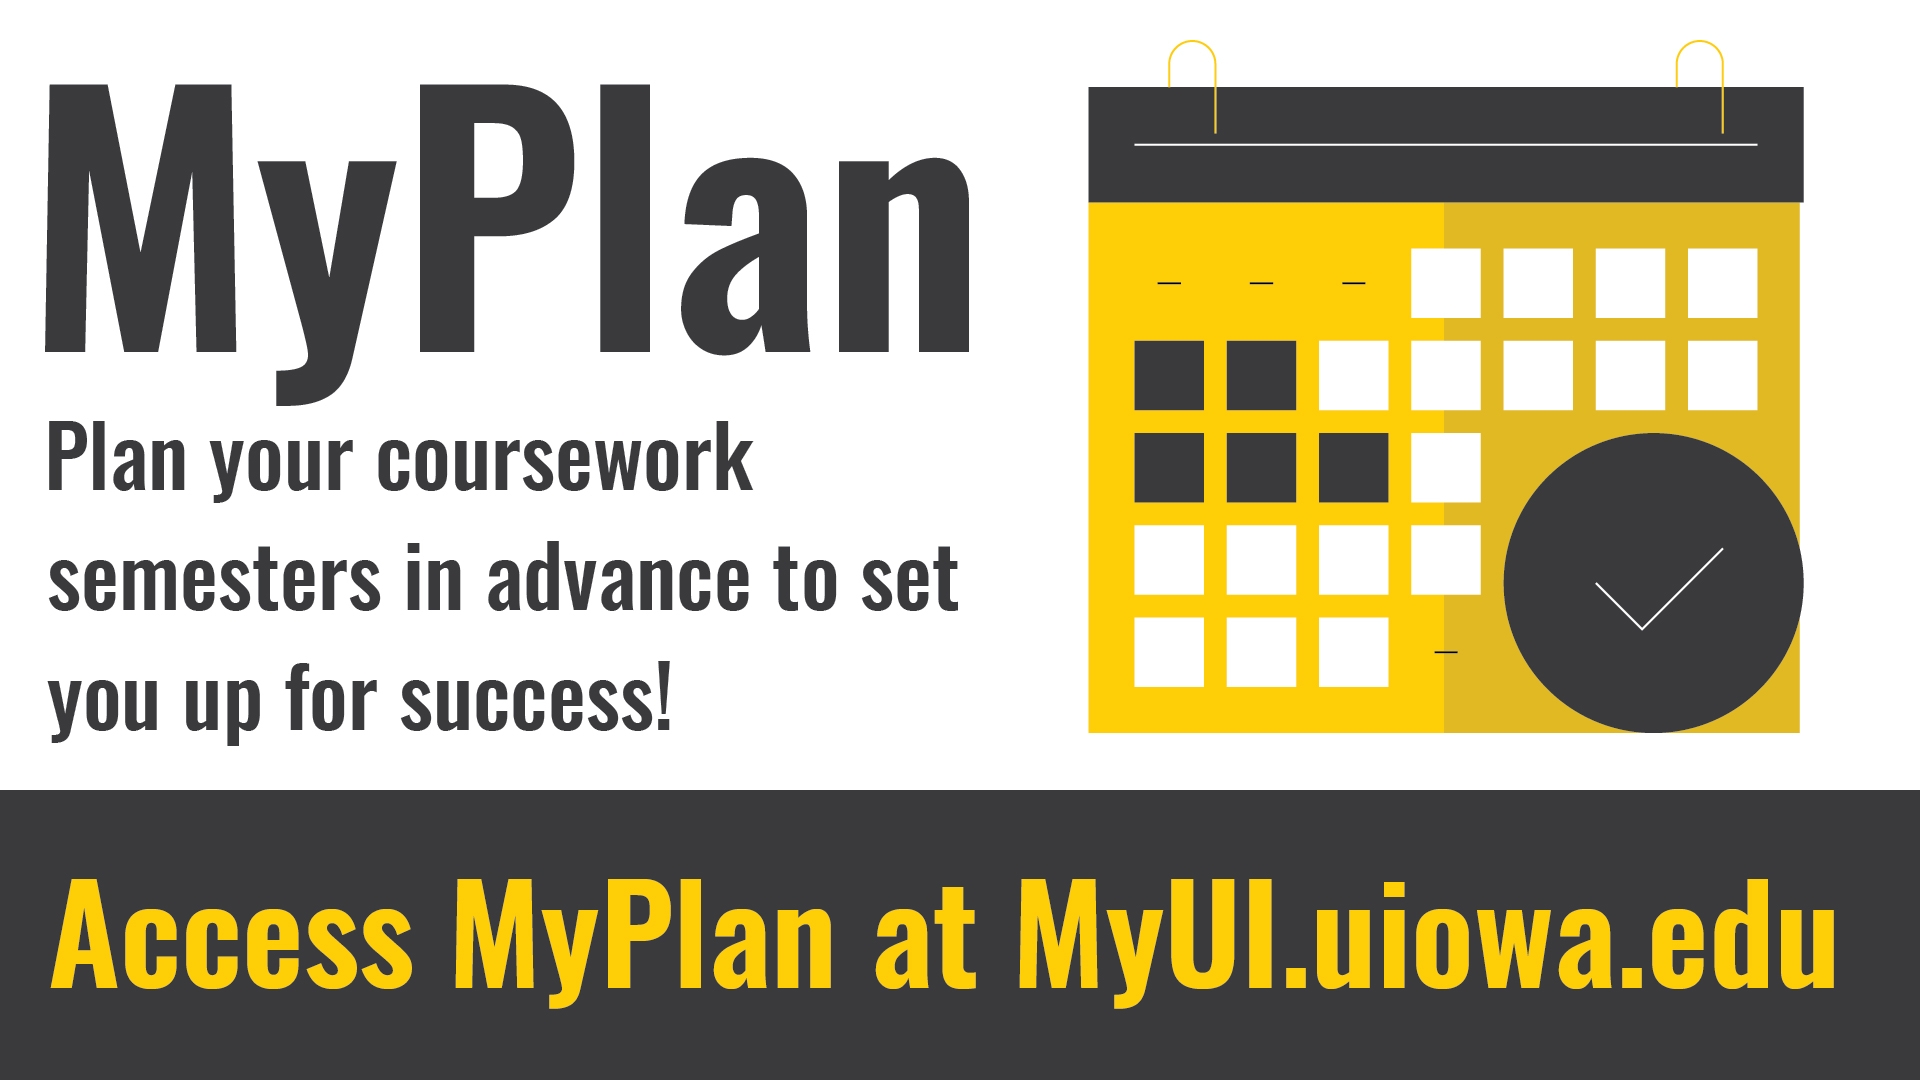 MyPlan: Plan your coursework semesters in advance to set you up for success! Access MyPlan at MyUI.uiowa.edu